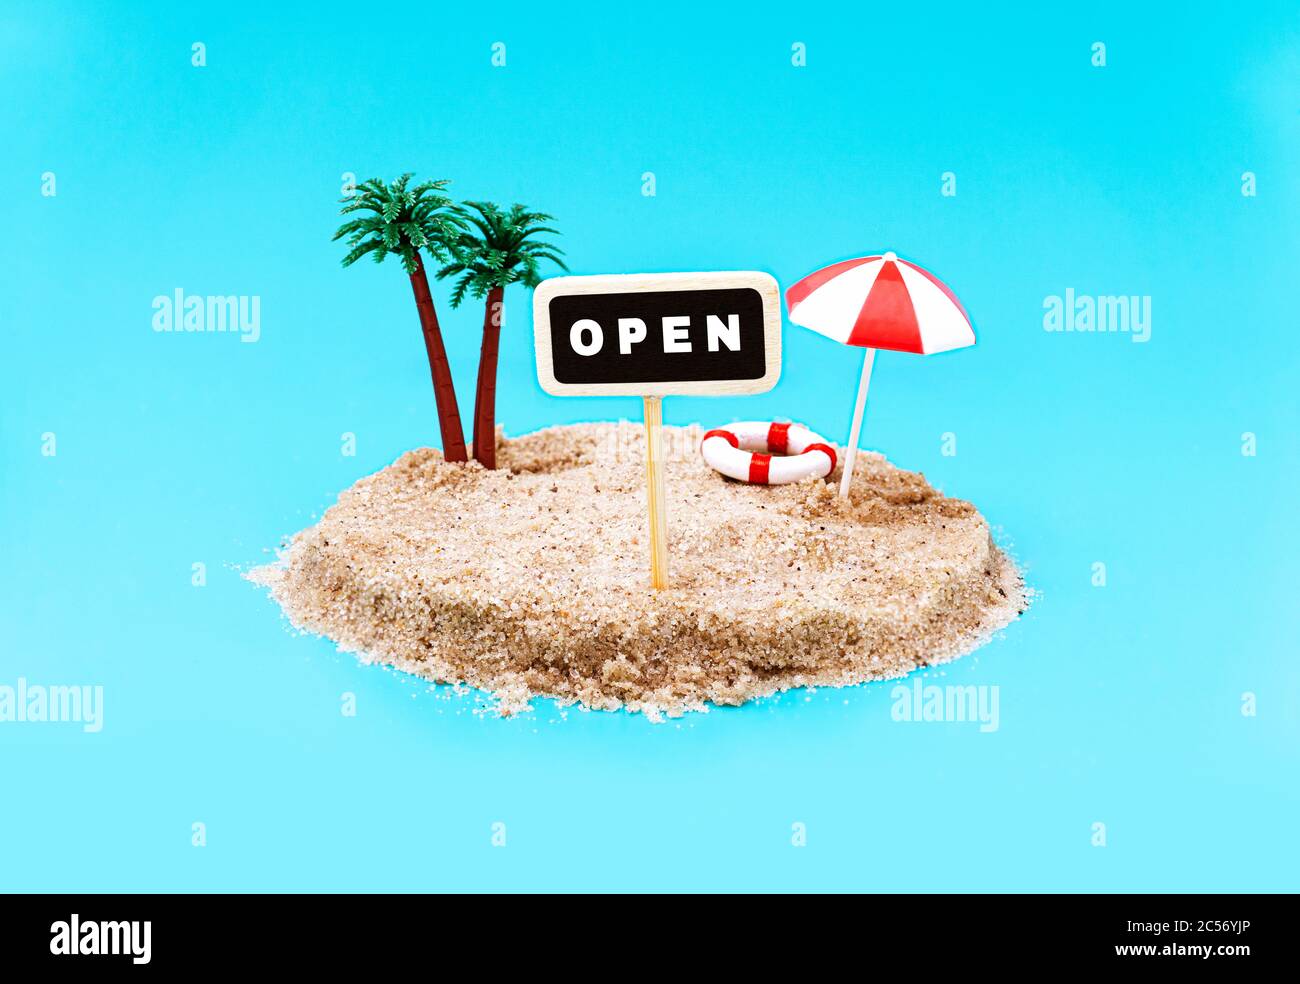 Miniature toy island with palm trees and a pole sign saying OPEN on a light blue background. Having summer break abroad during covid-19. Travel destin Stock Photo